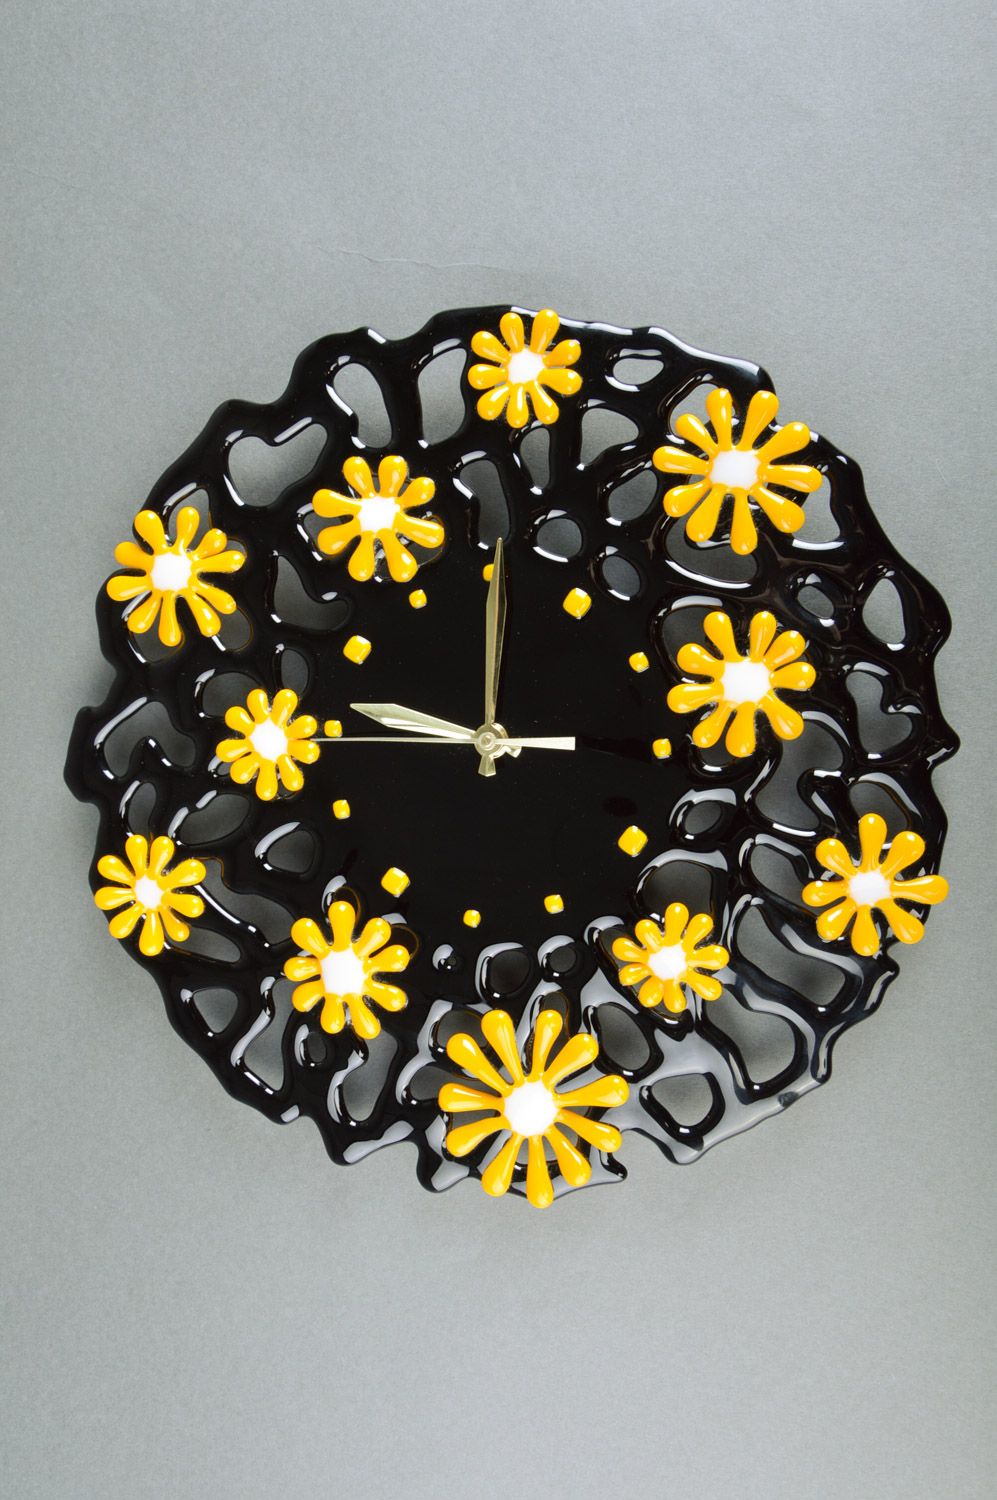 Handmade decorative round fused glass wall clock in black and yellow colors photo 2